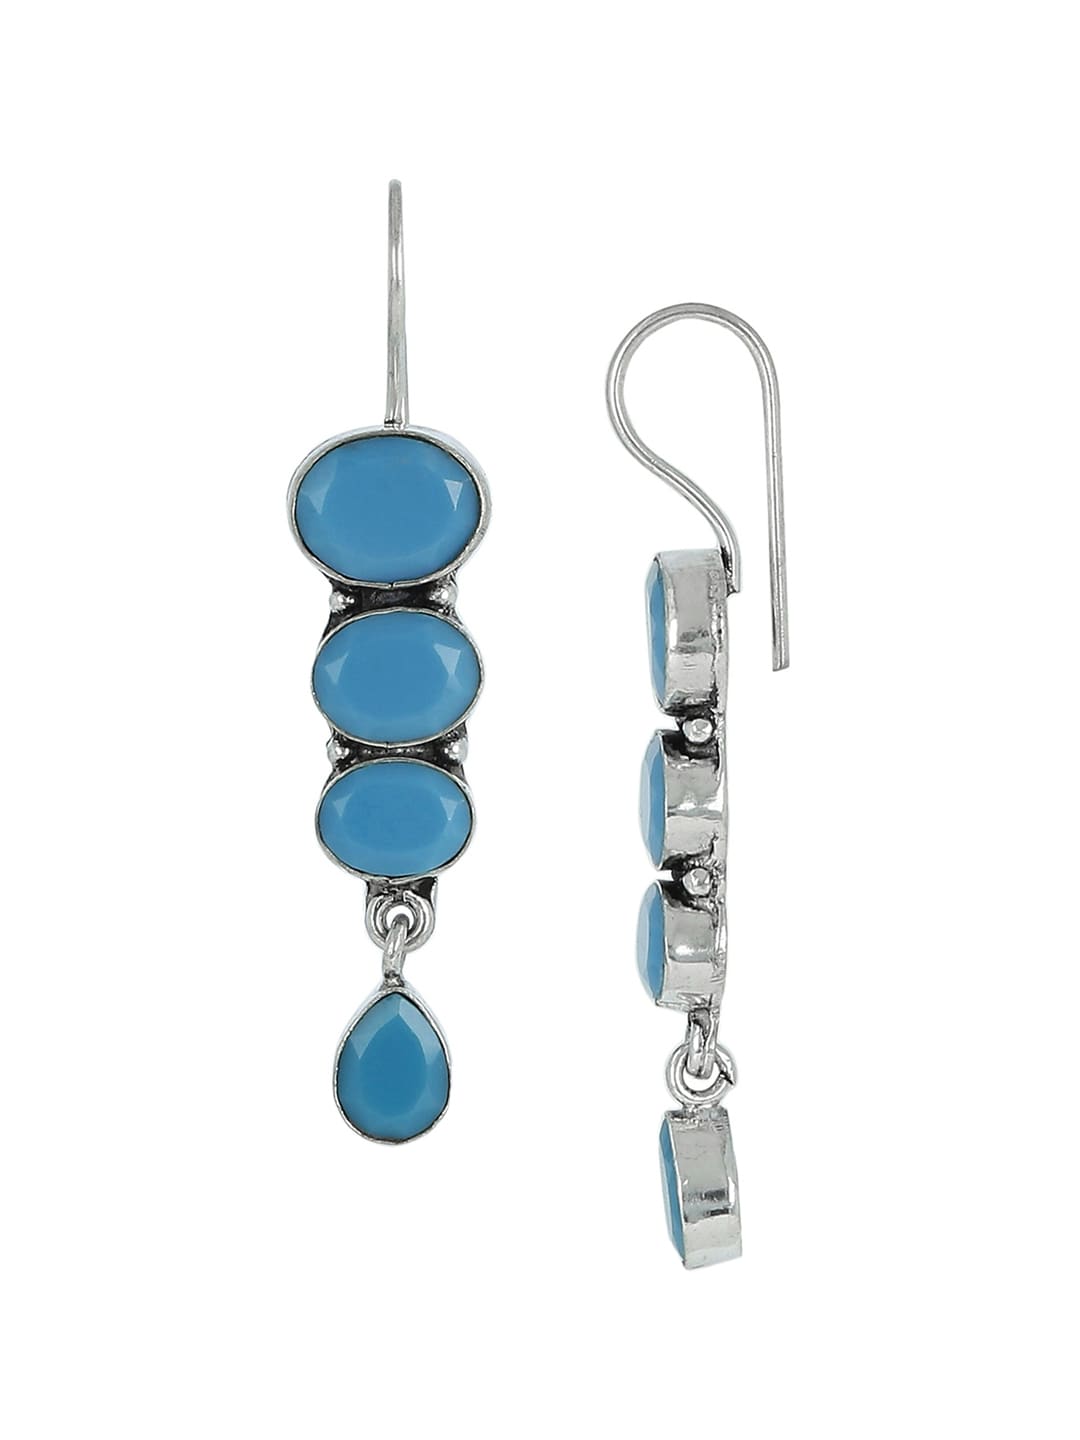 EL REGALO Blue Contemporary Stone-Studded Drop Earrings - for Women and Girls
Style ID: 16991450